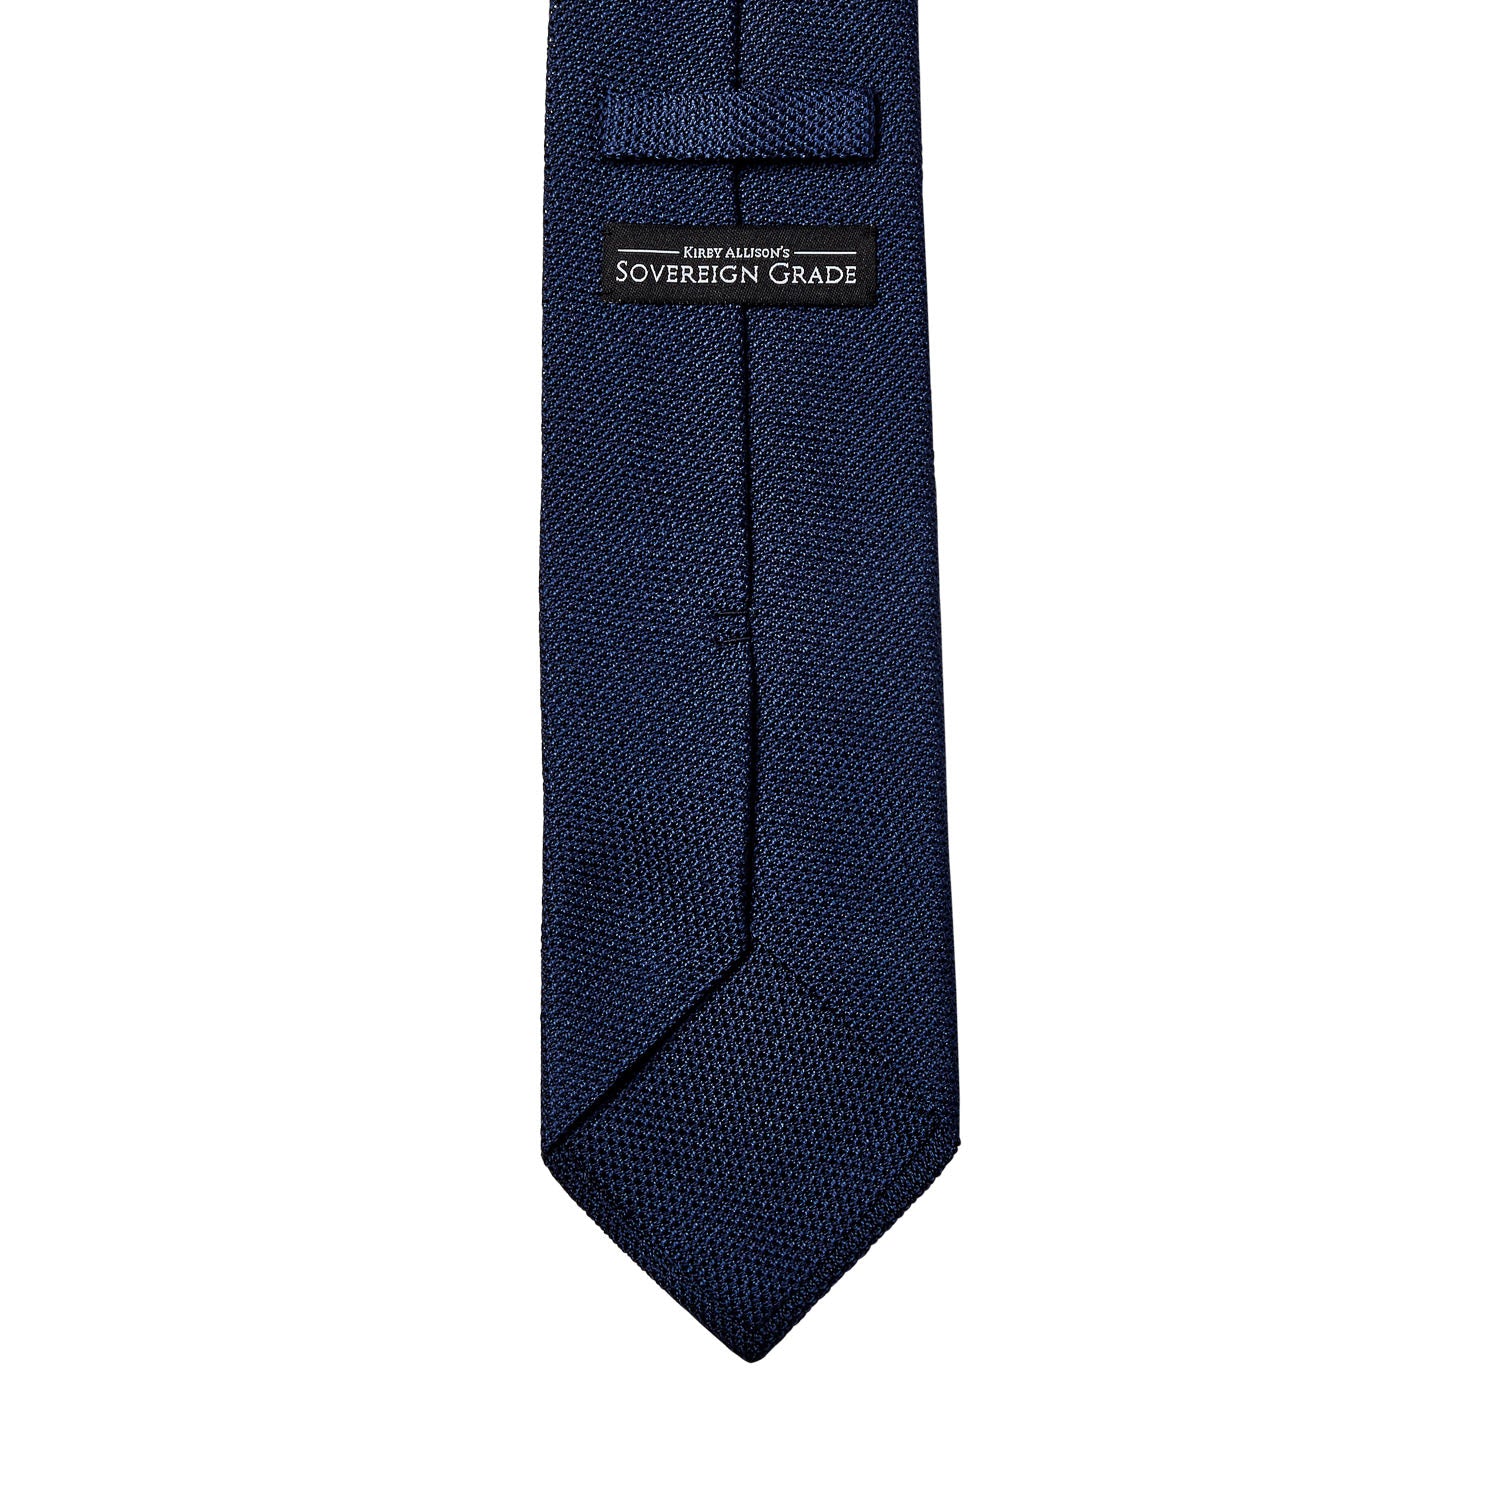 A Sovereign Grade Grenadine Fina Navy Tie from KirbyAllison.com, originating from the United Kingdom, displayed on a clean white background.